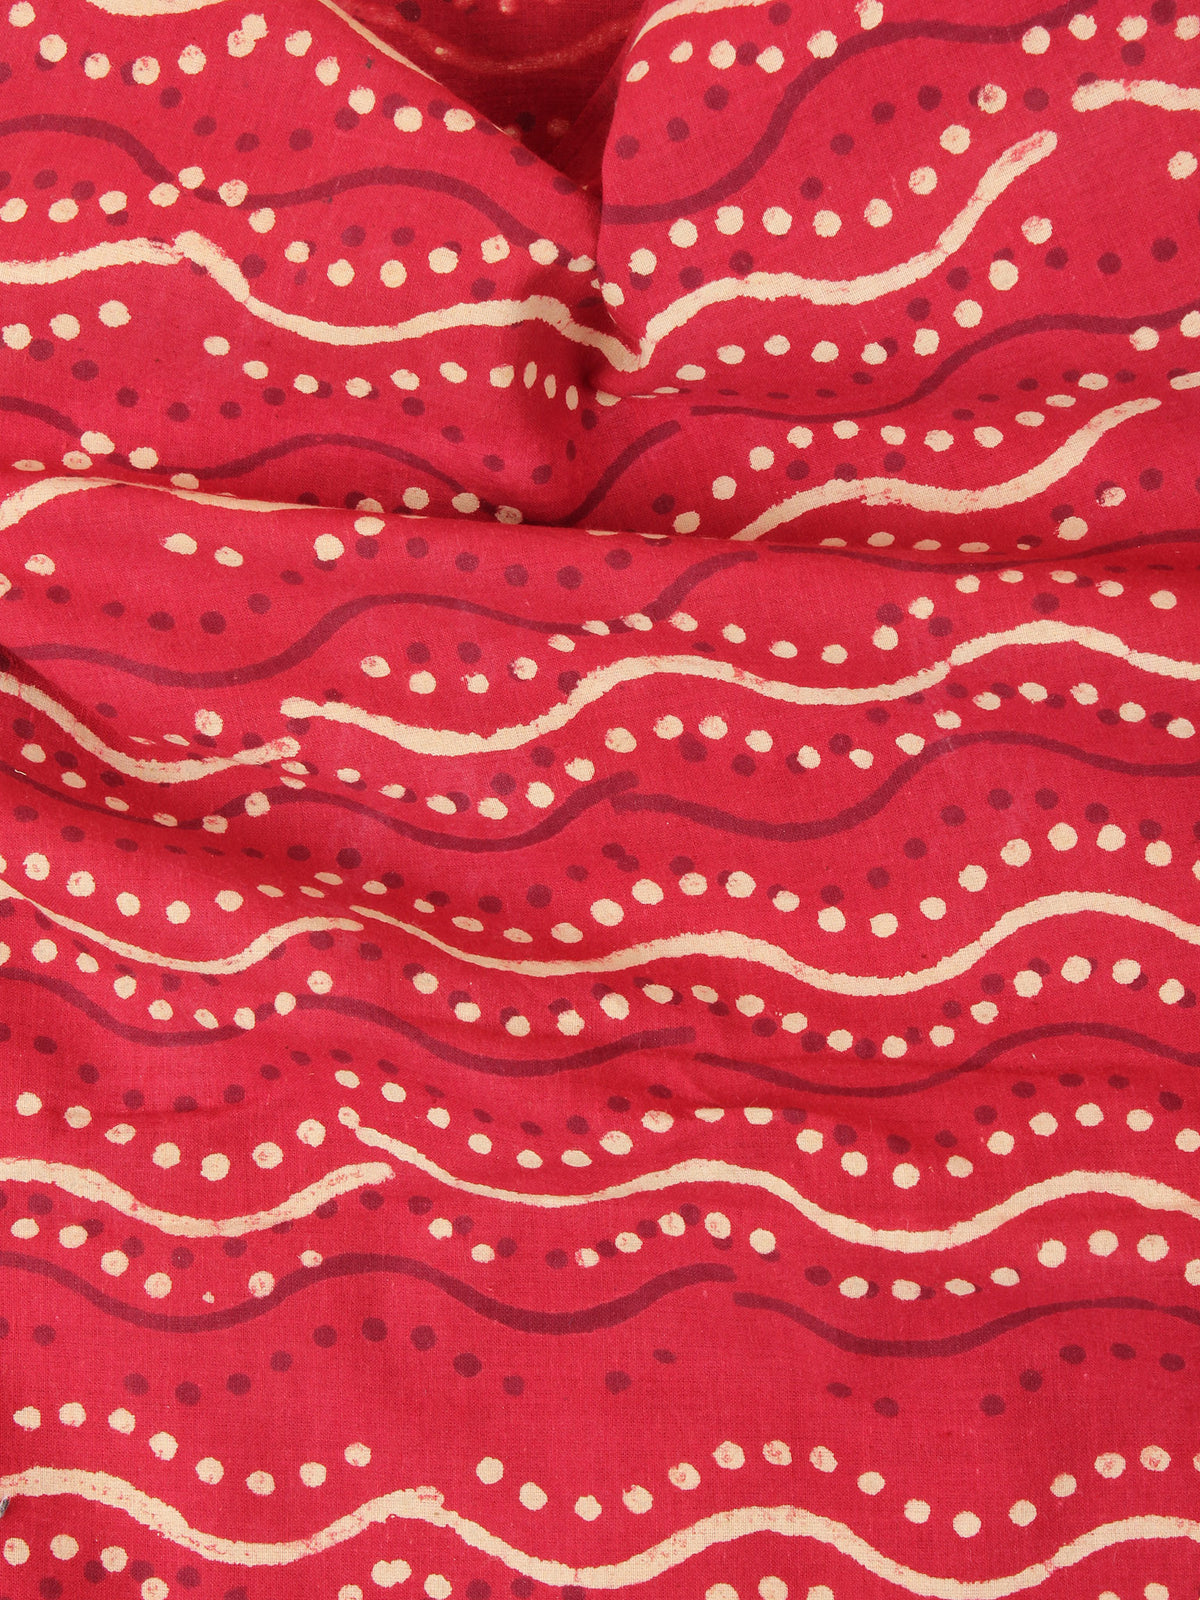 Red Beige Leharia Natural Dyed Hand Block Printed Cotton Fabric Per Meter - F0916223